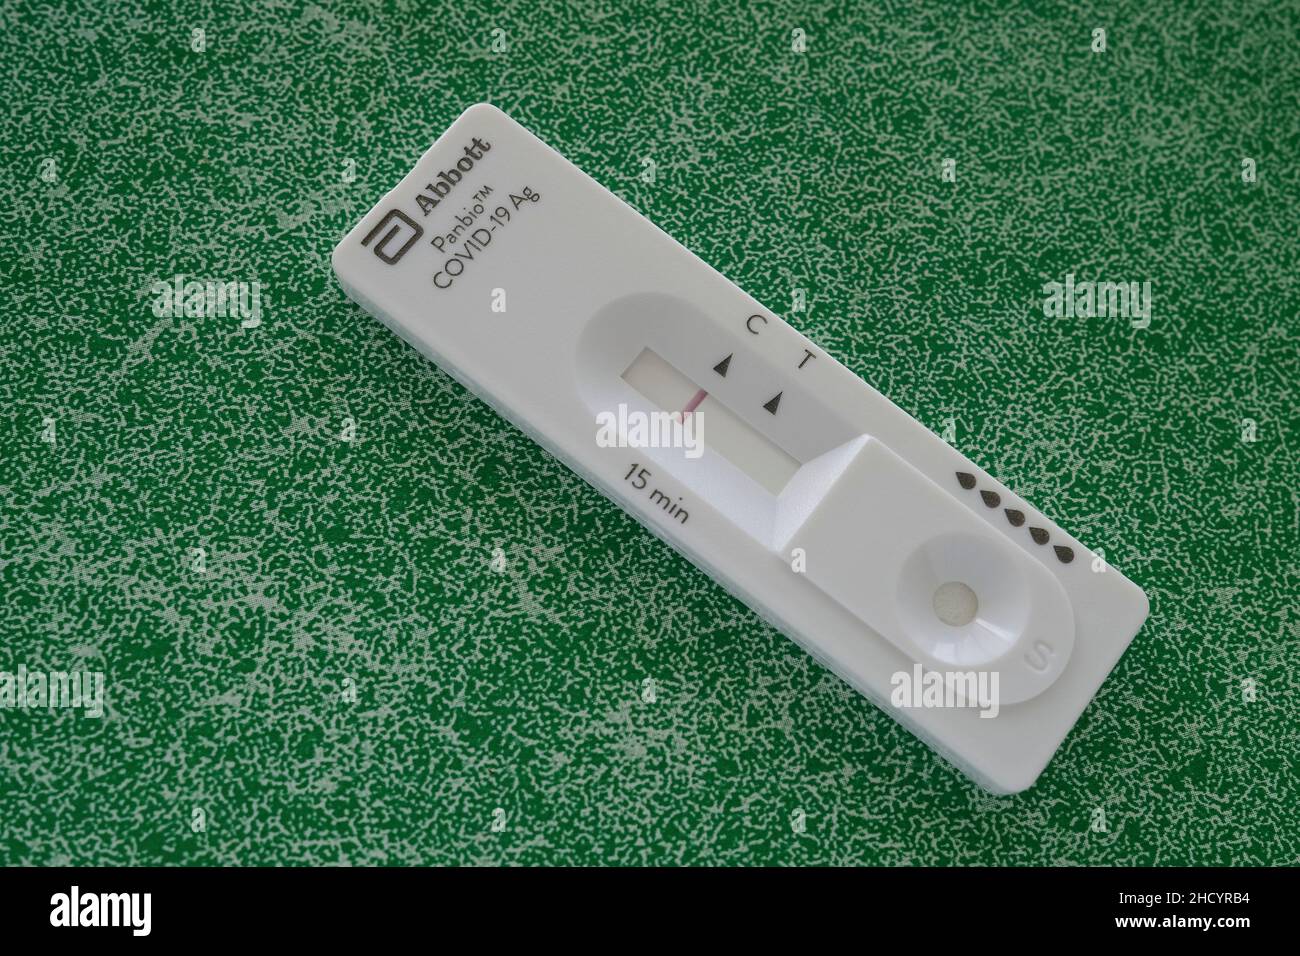 Abbott Panbio rapid Covid19 antigen self test commonly called RAT Tests, showing a negative result to Covid19 Stock Photo